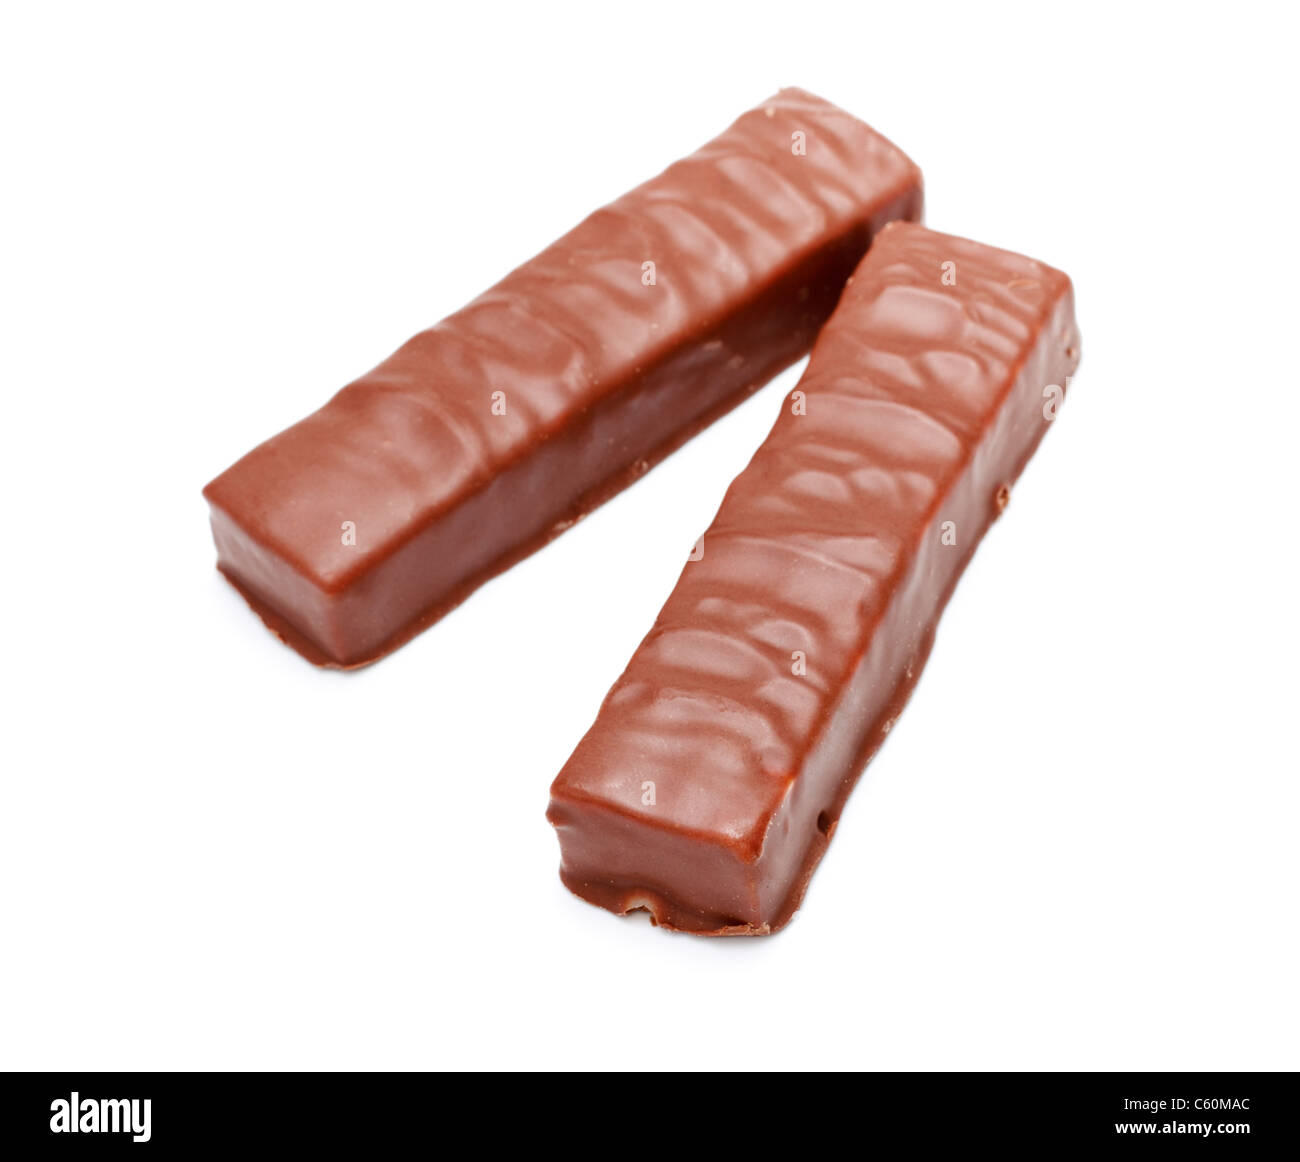 two candy bars isolated on white background Stock Photo